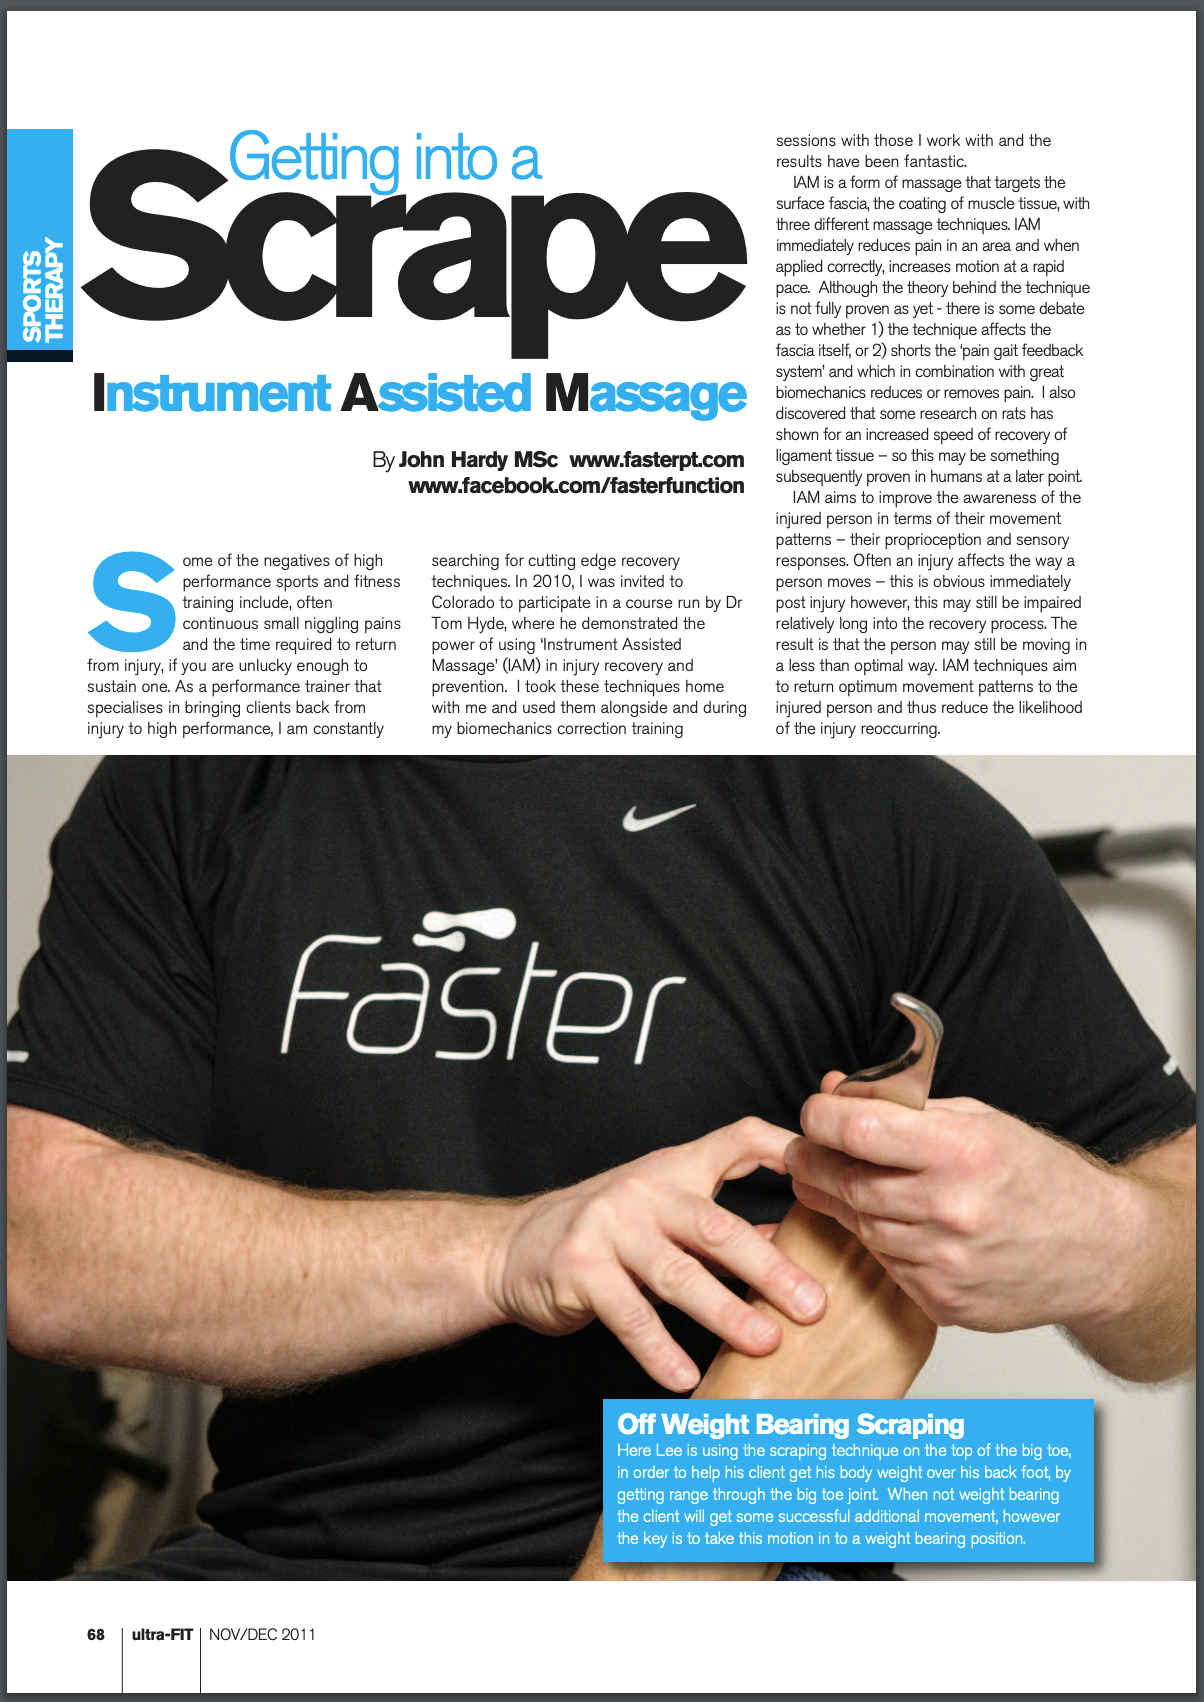 ULTRA-FIT MAGAZINE, DECEMBER 2011: Getting into a Scrape: Instrument Assisted Massage